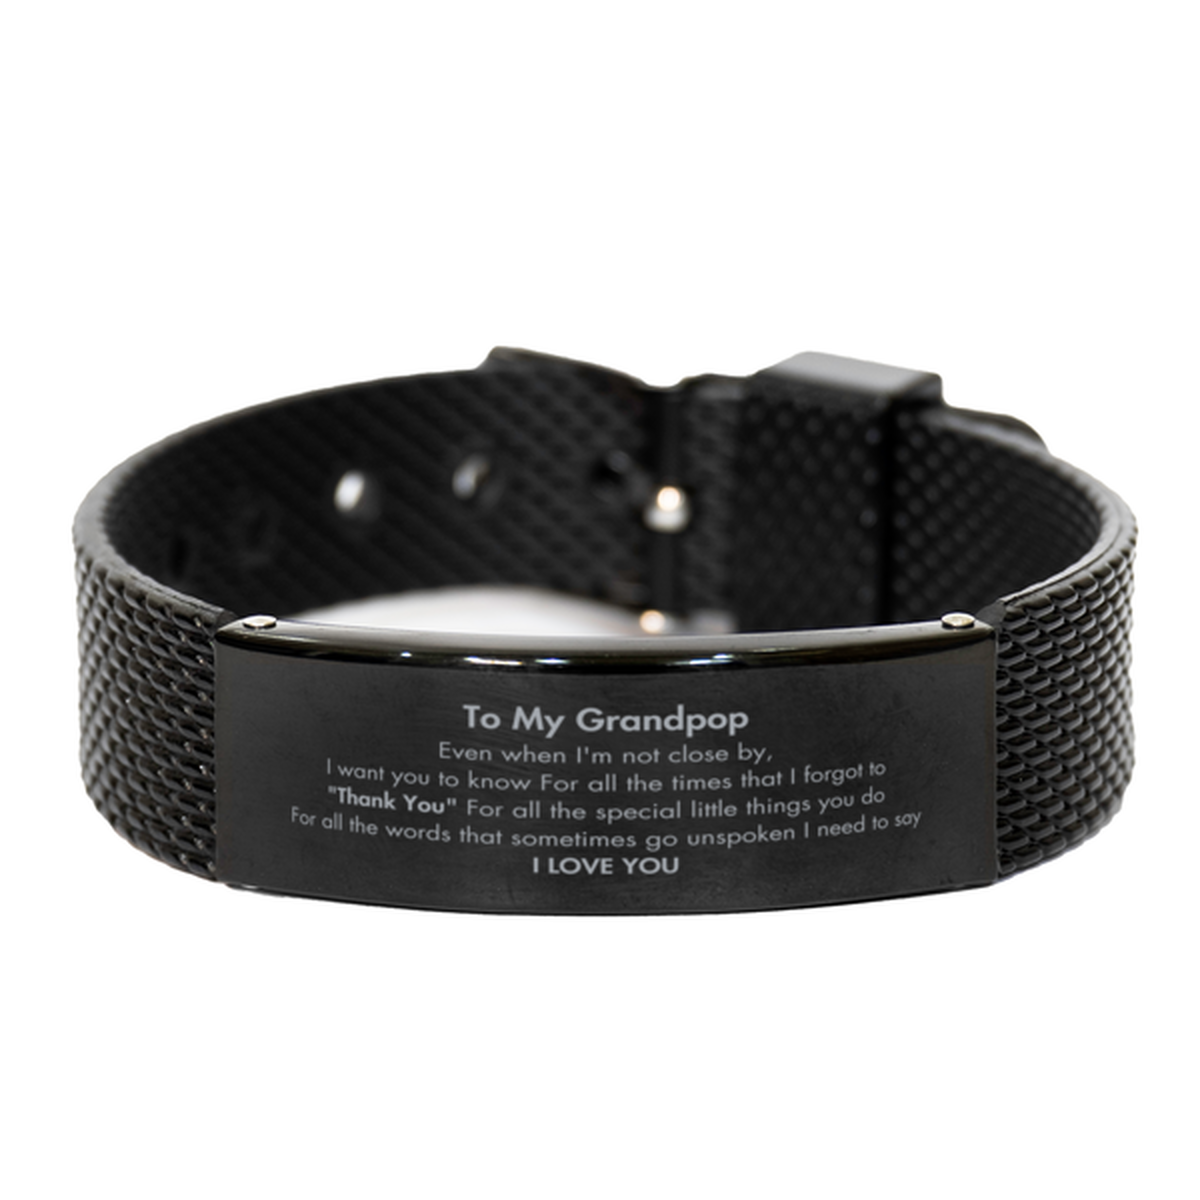 Thank You Gifts for Grandpop, Keepsake Black Shark Mesh Bracelet Gifts for Grandpop Birthday Mother's day Father's Day Grandpop For all the words That sometimes go unspoken I need to say I LOVE YOU